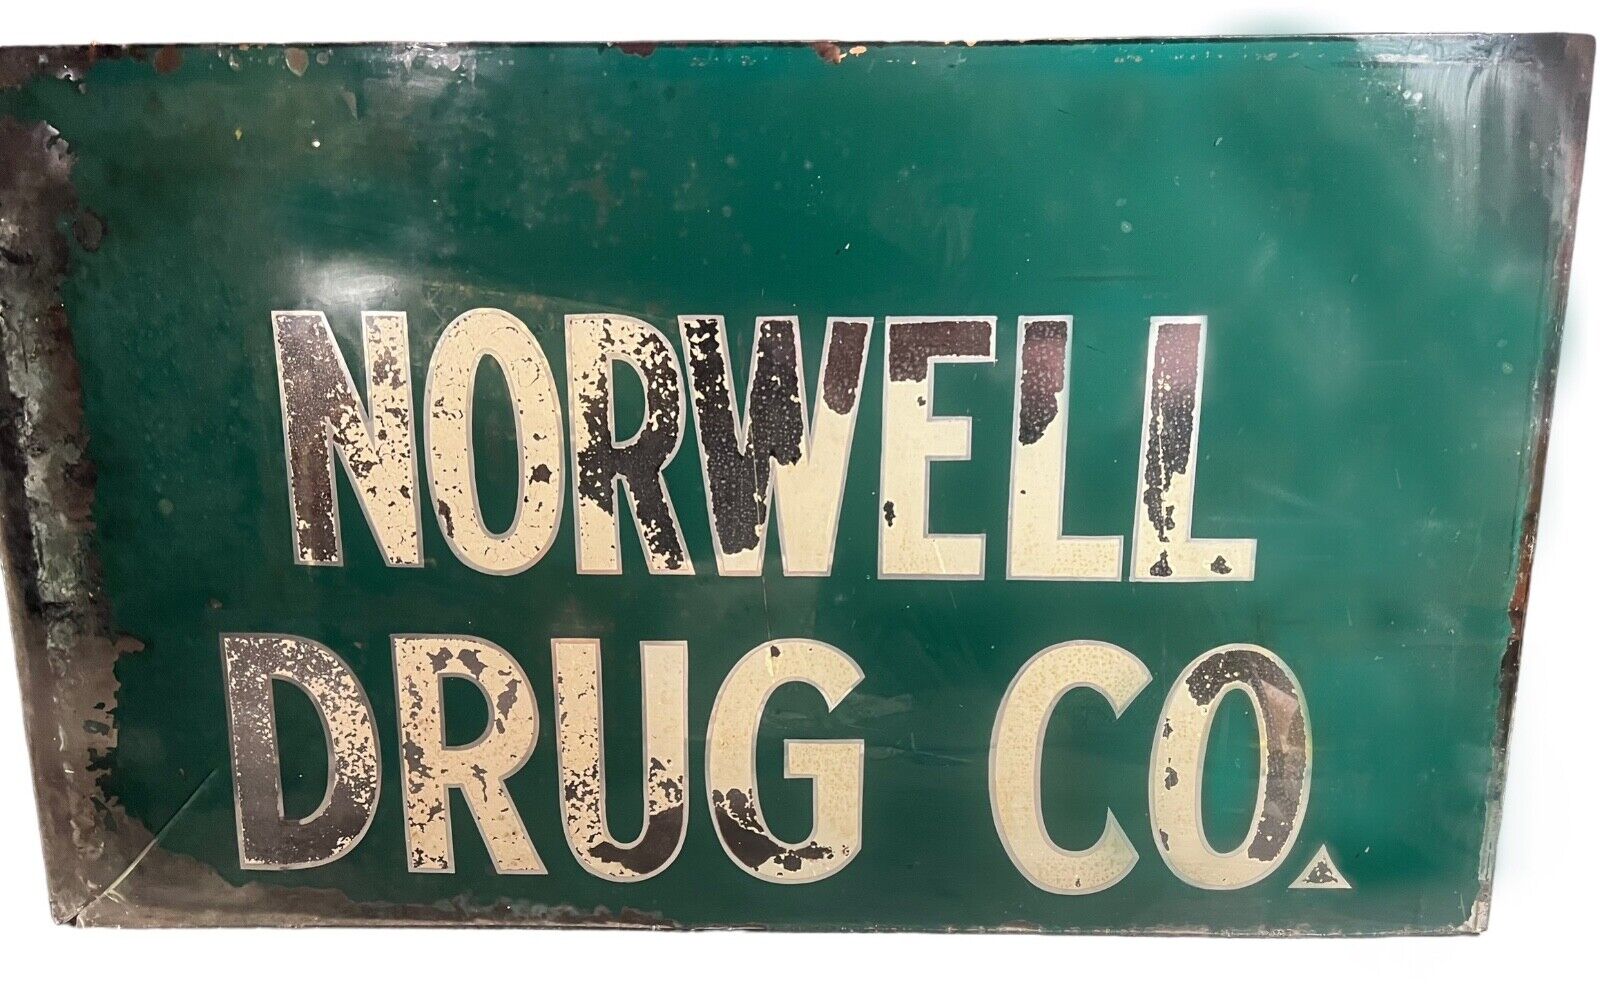 Vintage 1950’s Norwell Drug Co. Reverse Painted Glass Advertising Sign